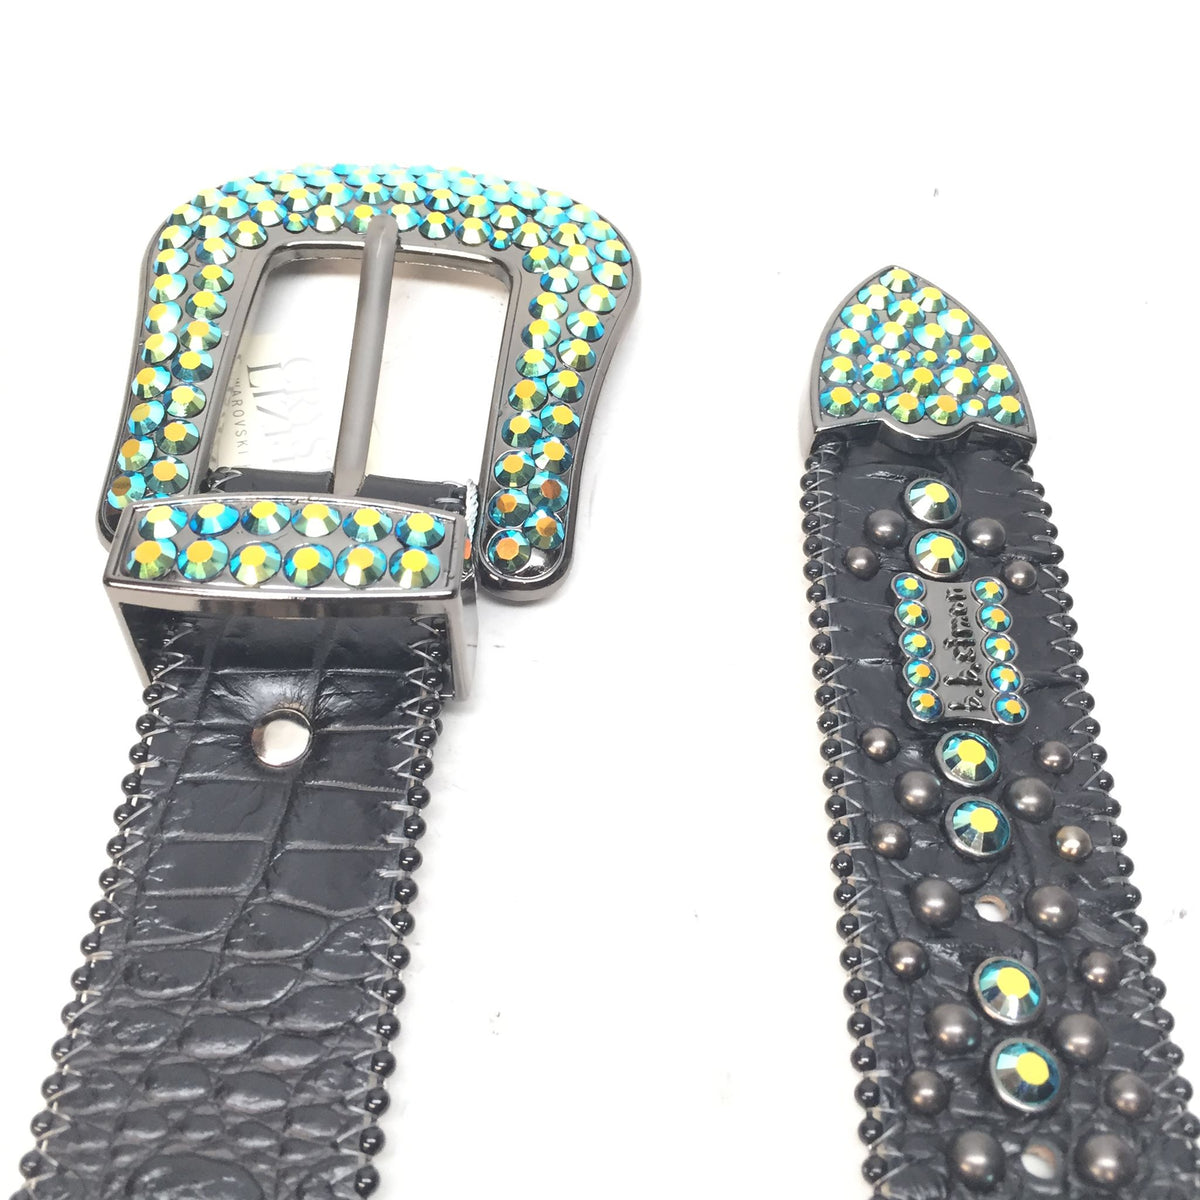 b.b. Simon Fully Loaded Turquoise Crystal Belt - Dudes Boutique